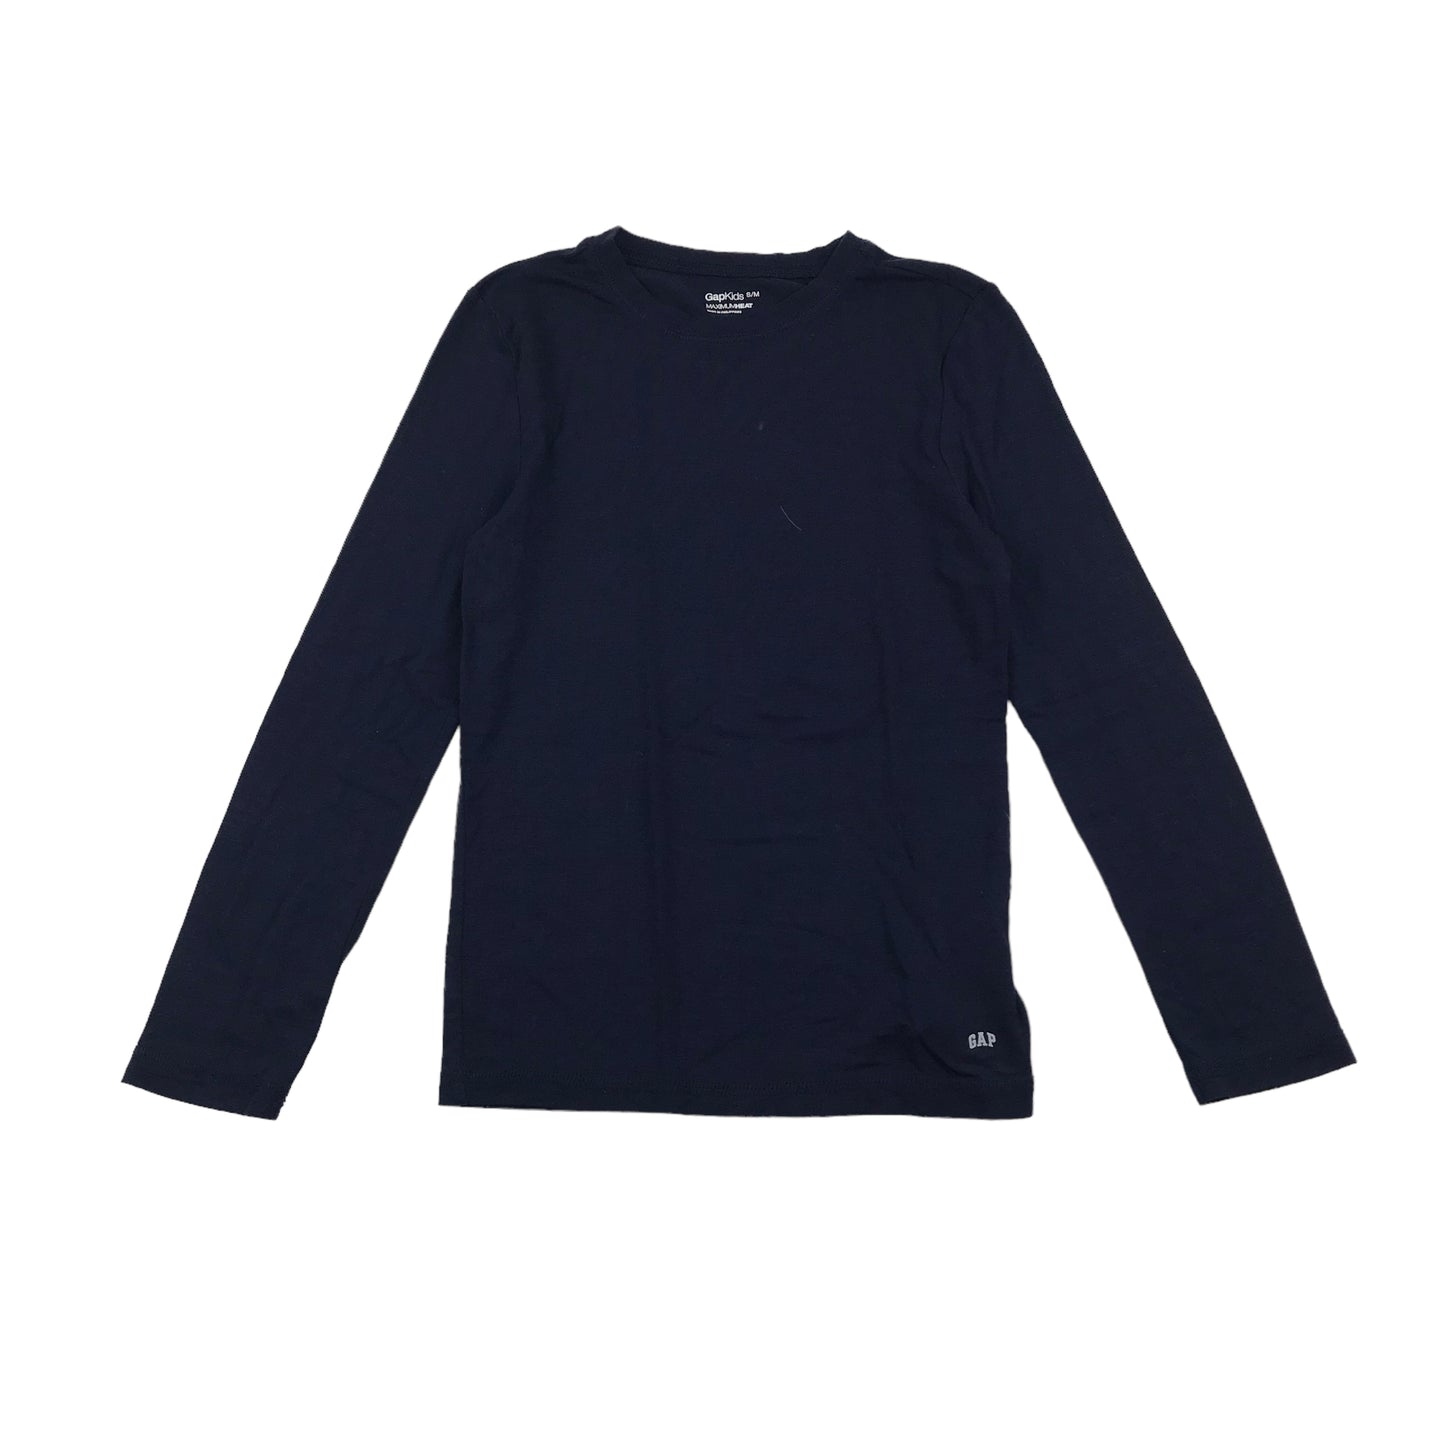 GAP Navy Blue Light Thermal Layer Top Age 8-9